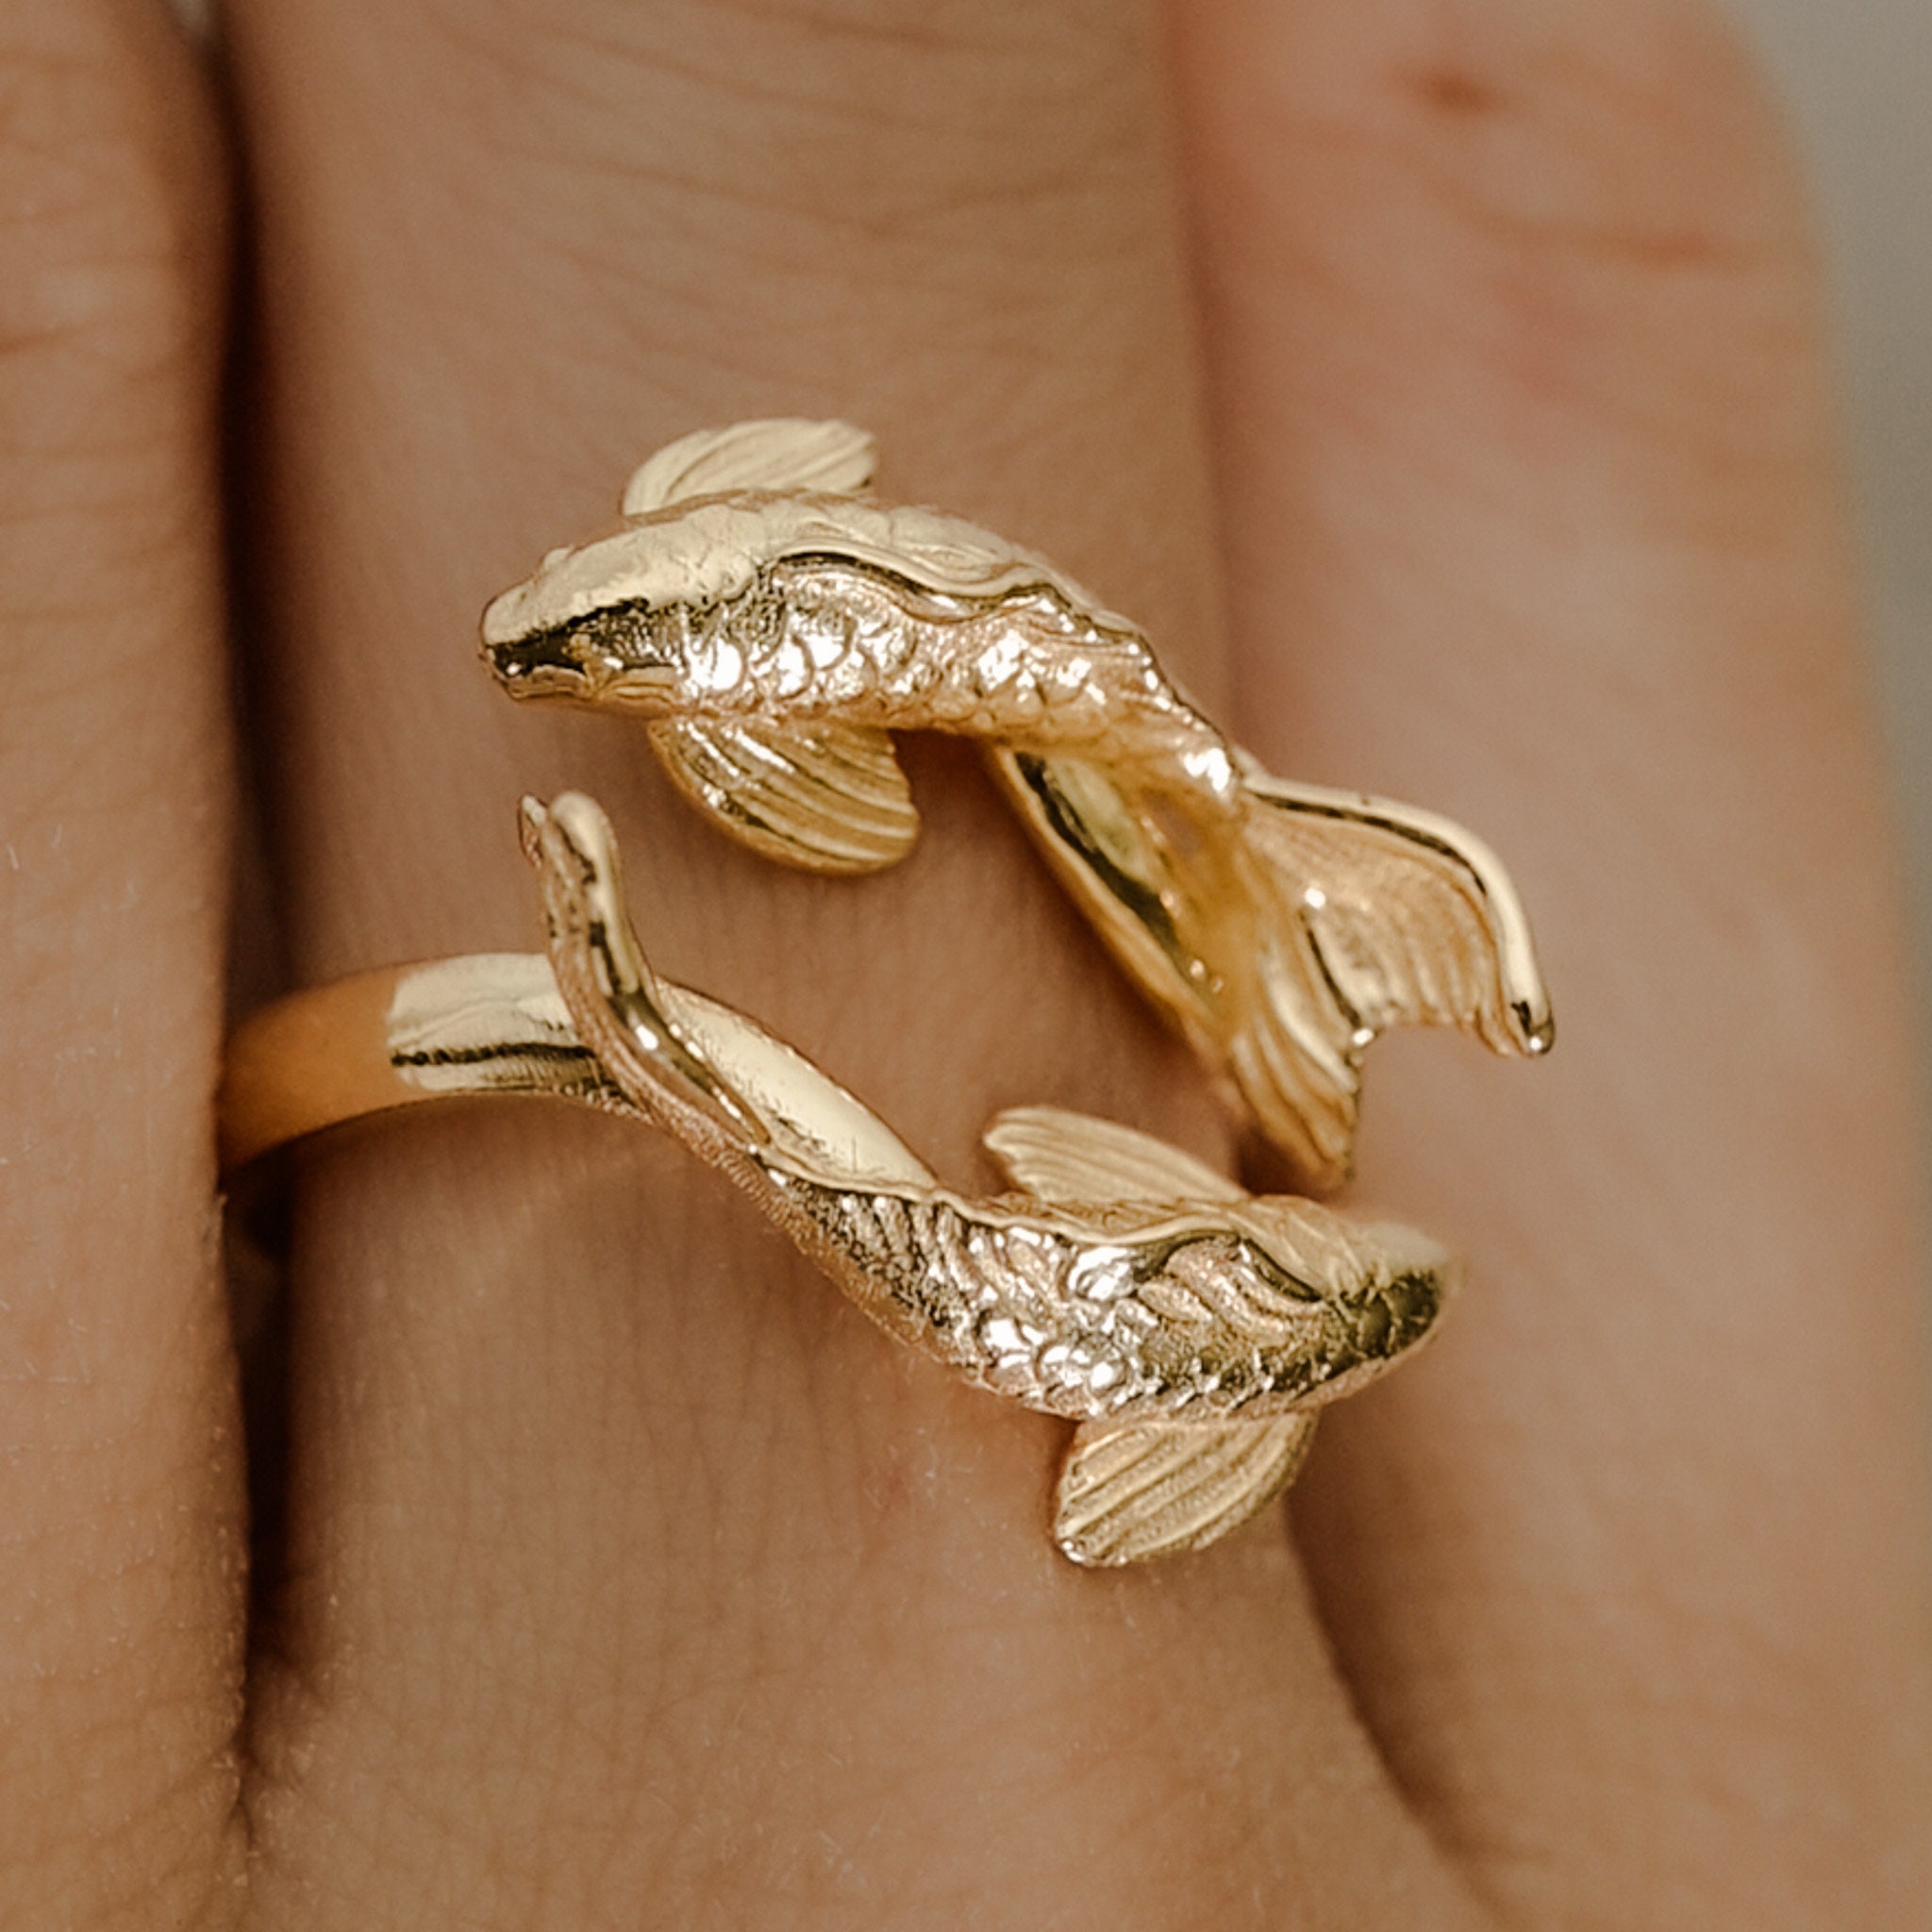 Gold Fish Ring, Swimming Fish Ring, Fish Ring, Sea Ring, Ocean Ring, Luck  Ring, Band Ring, Open Adjustable Ring, Gift Ring for Him and Her - Etsy